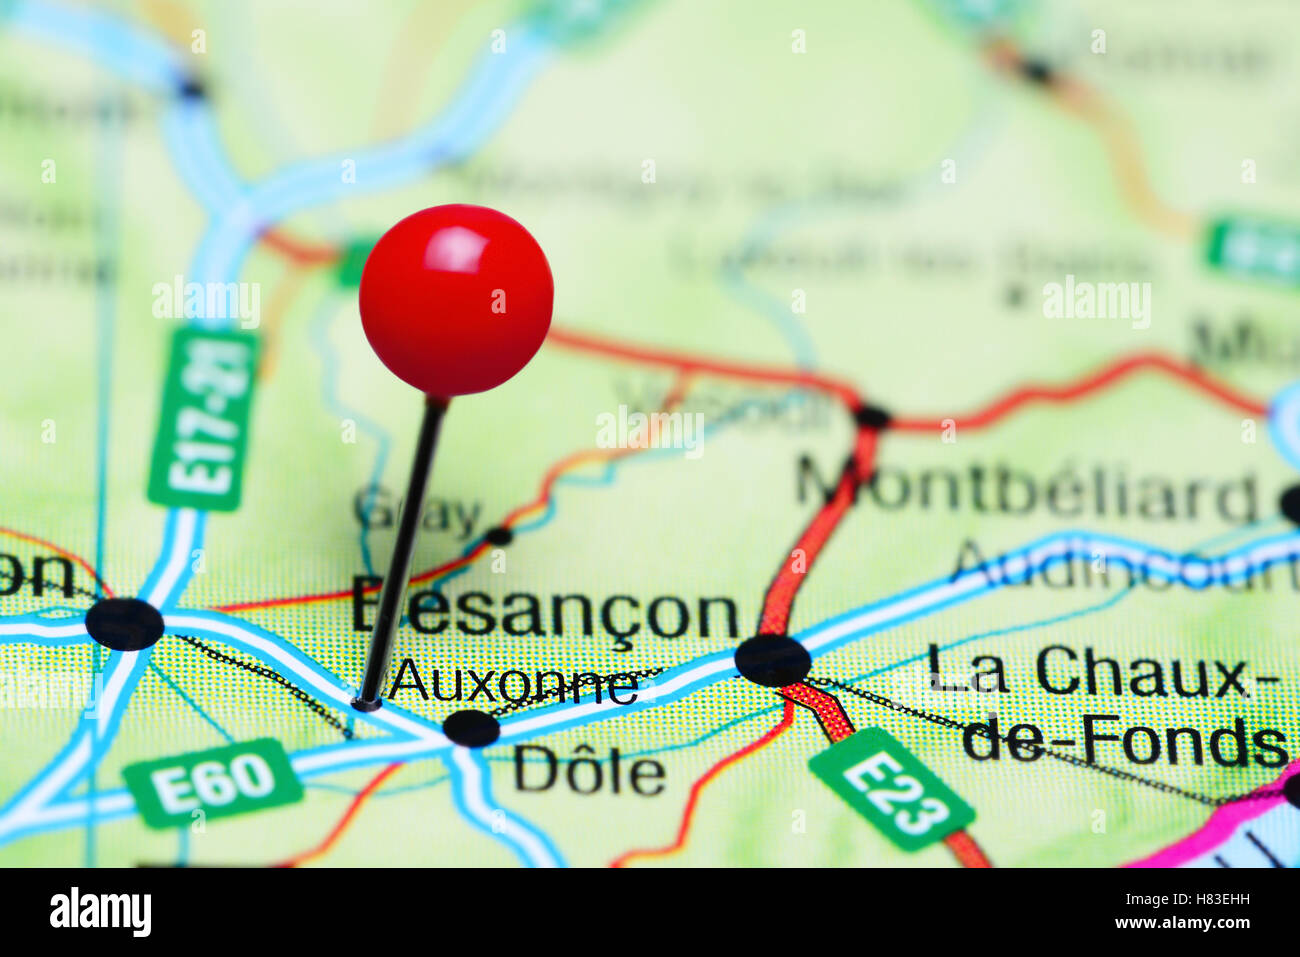 Auxonne pinned on a map of France Stock Photo